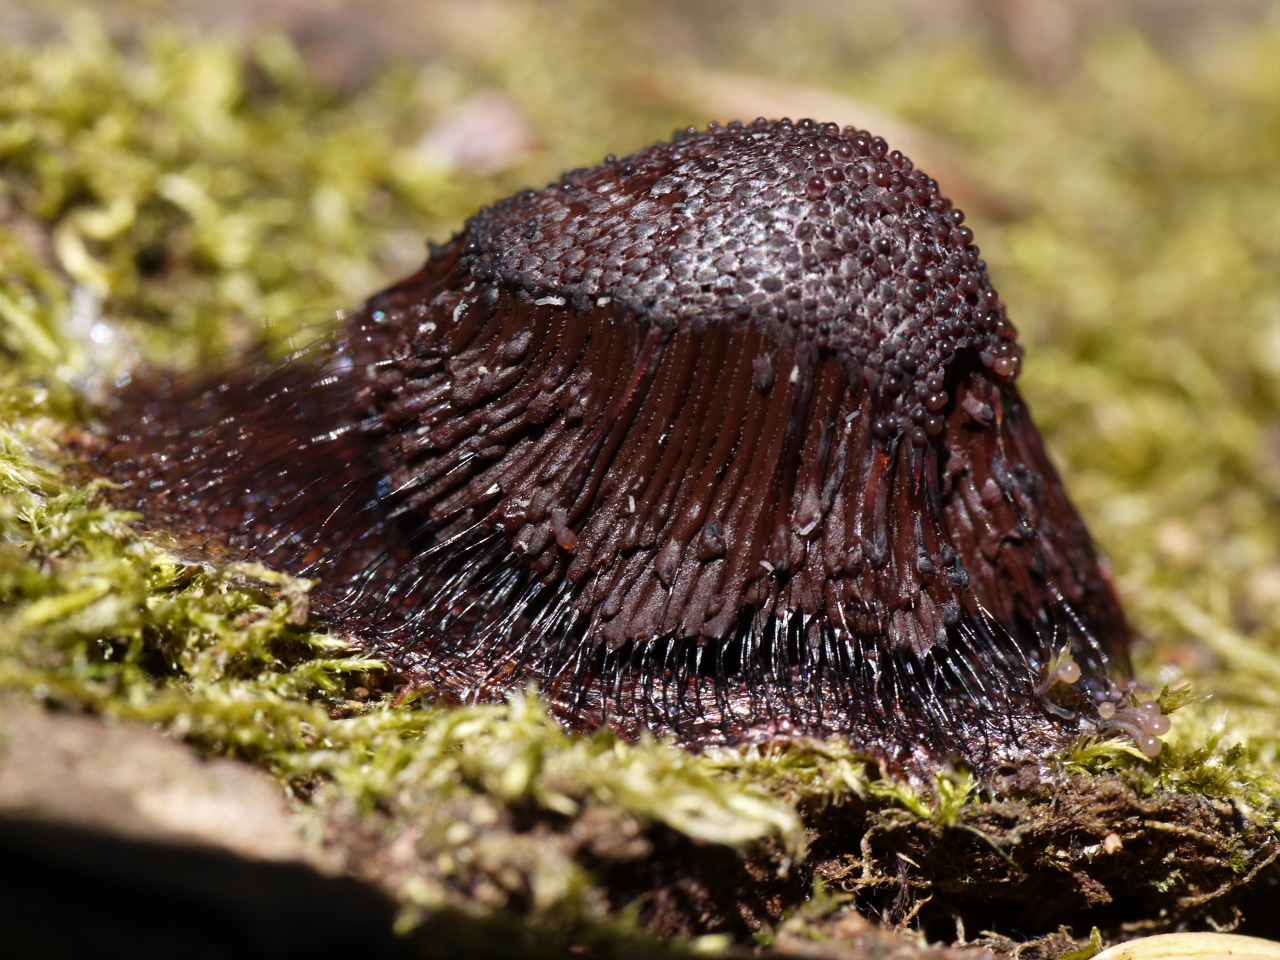 Stemonitis sp. “Brown Plasmodial Slime Mold” Myxogastria
Point Defiance Park, Tacoma, WA
July 8, 2013
Robert Niese
Slime molds are colonial unicellular organisms that are distantly related to animals and fungi. They are active predators of bacteria,...